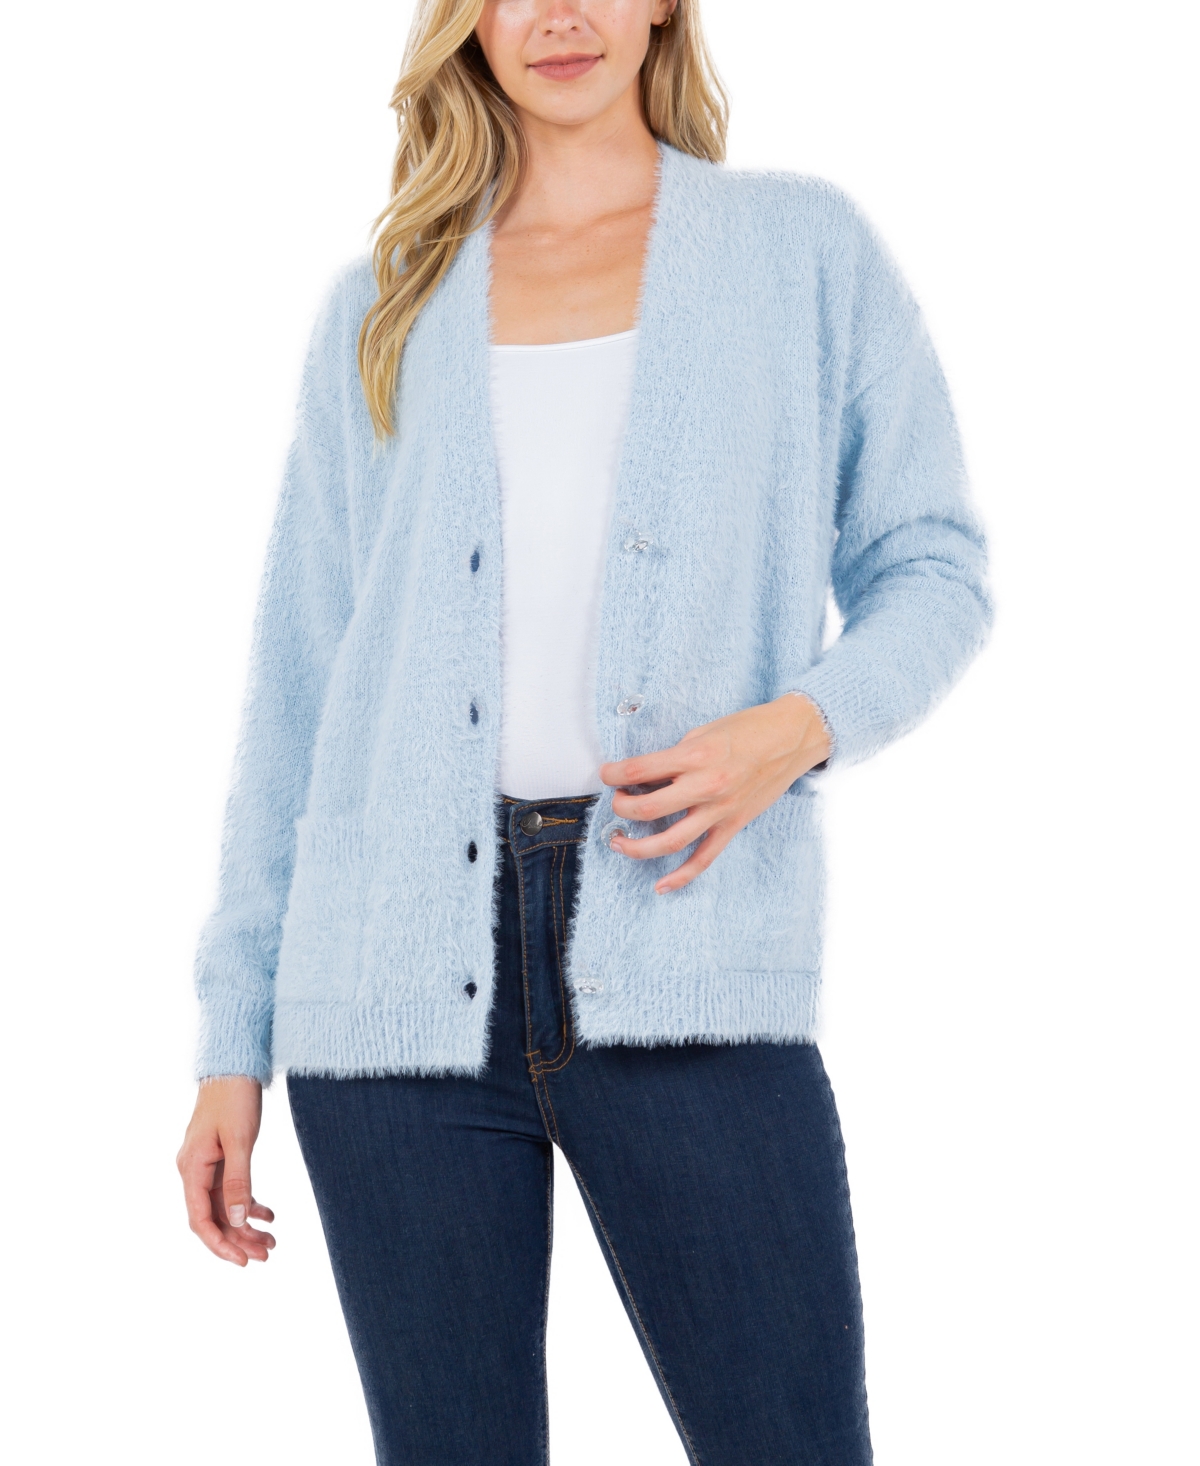 Fever Women's Feather Cardigan Sweater With Jewel Button In Cashmere Blue